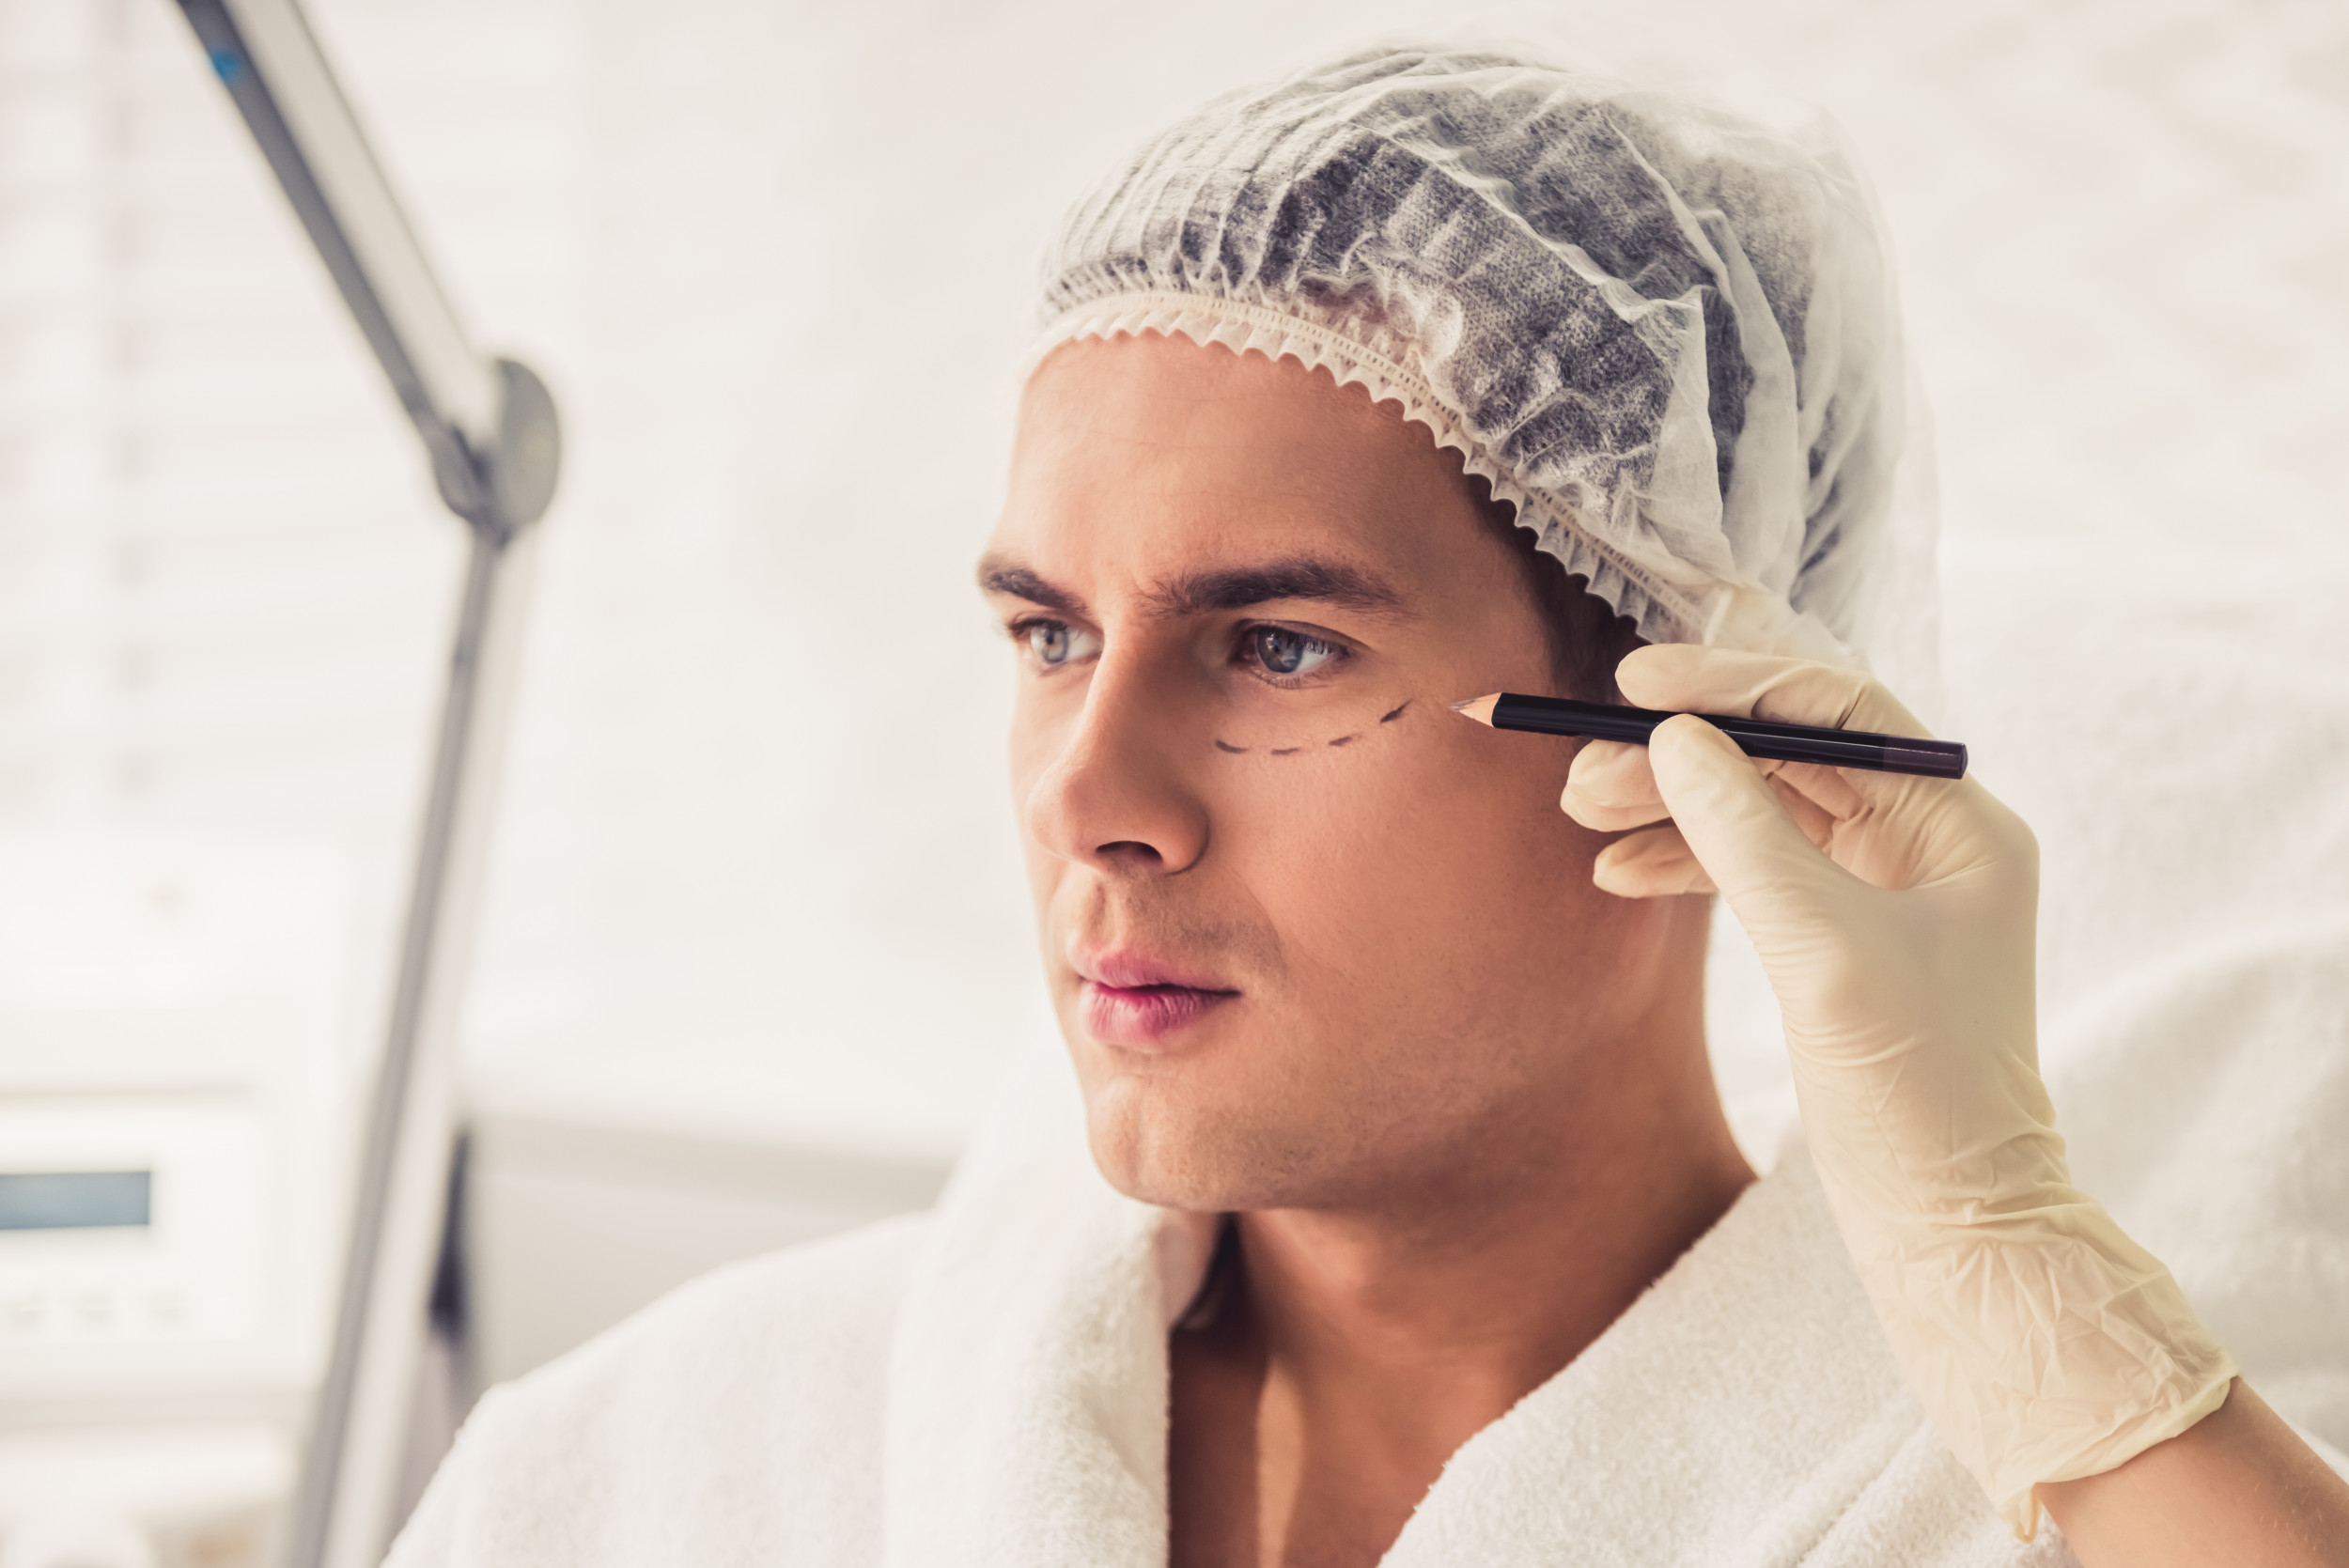 How To Find Plastic Surgeon – Know The Tips